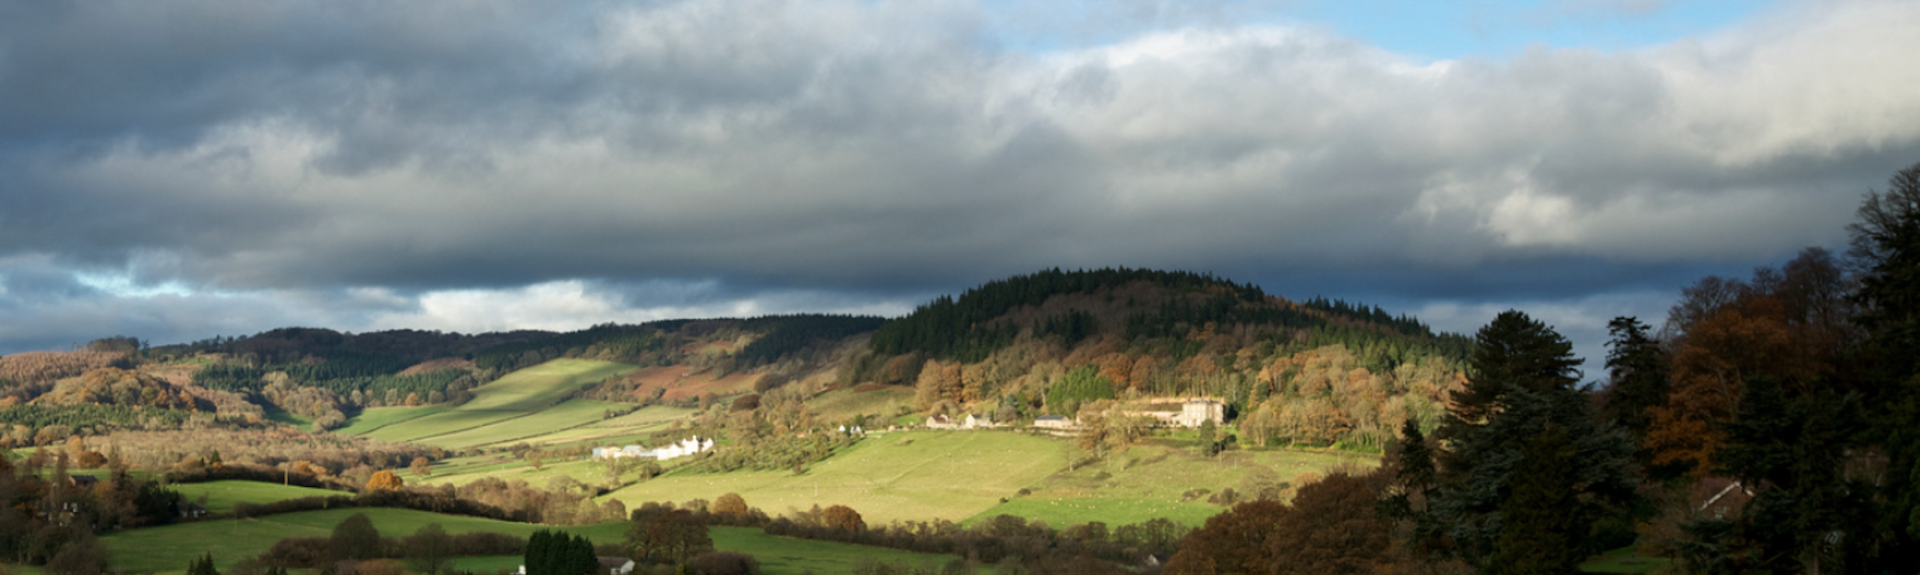 A landscape view of the Wye Valley with trees and open fields. In the foreground are some stone farm buildings  beyond which the land rises to a small hill on the horizon.